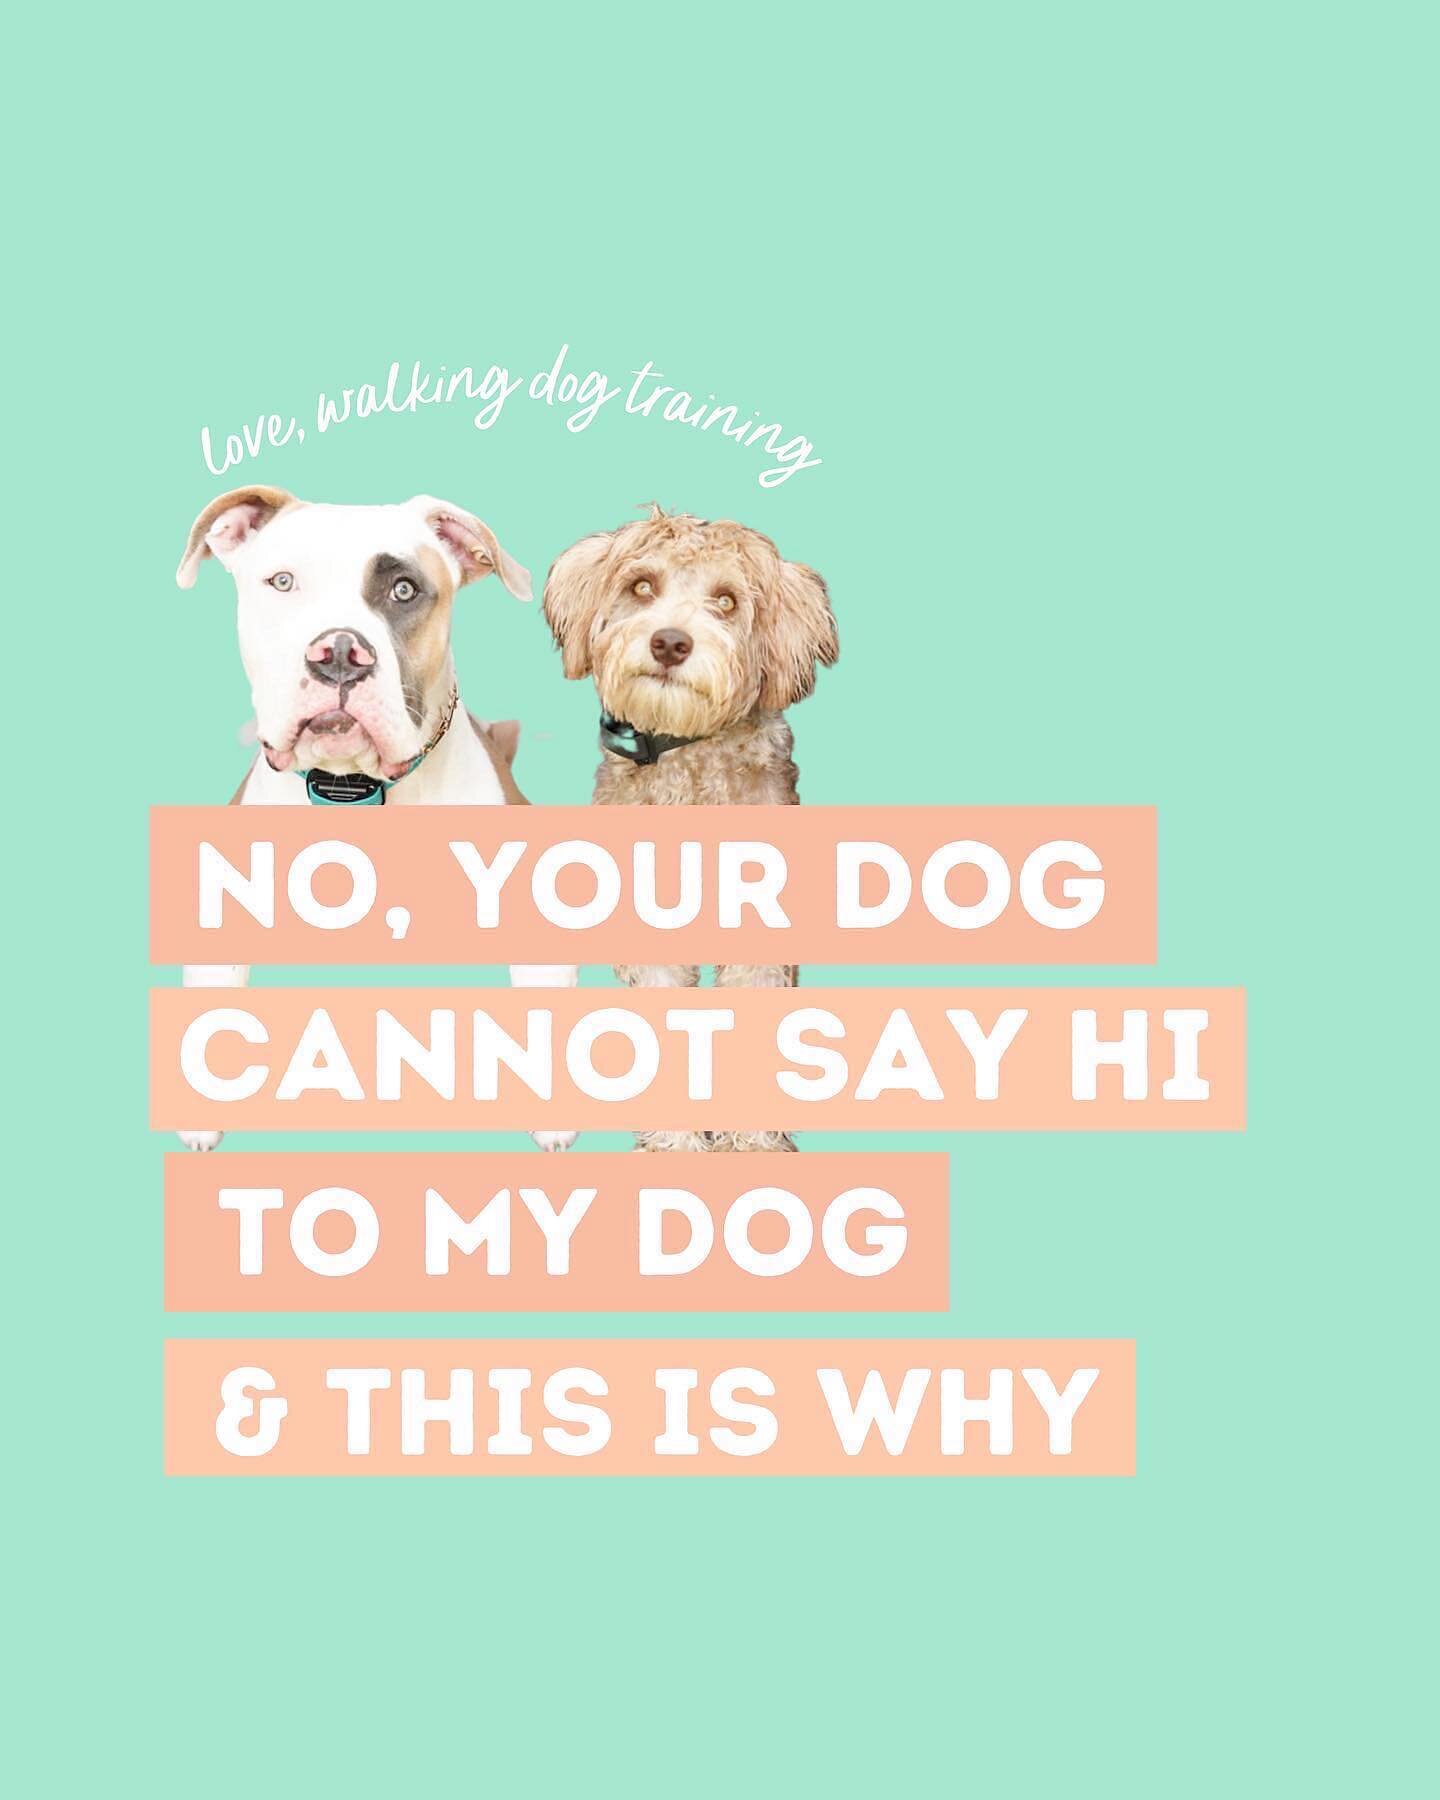 That&rsquo;s a N O for me 😍🤌🏼&hearts;️
.
Any others you&rsquo;d like to add to the list?
.
Feel free to share and save this for reference 🥳
.
Saying no to on-leash greetings does not make you mean.  It truly is what&rsquo;s best for most dogs.  E